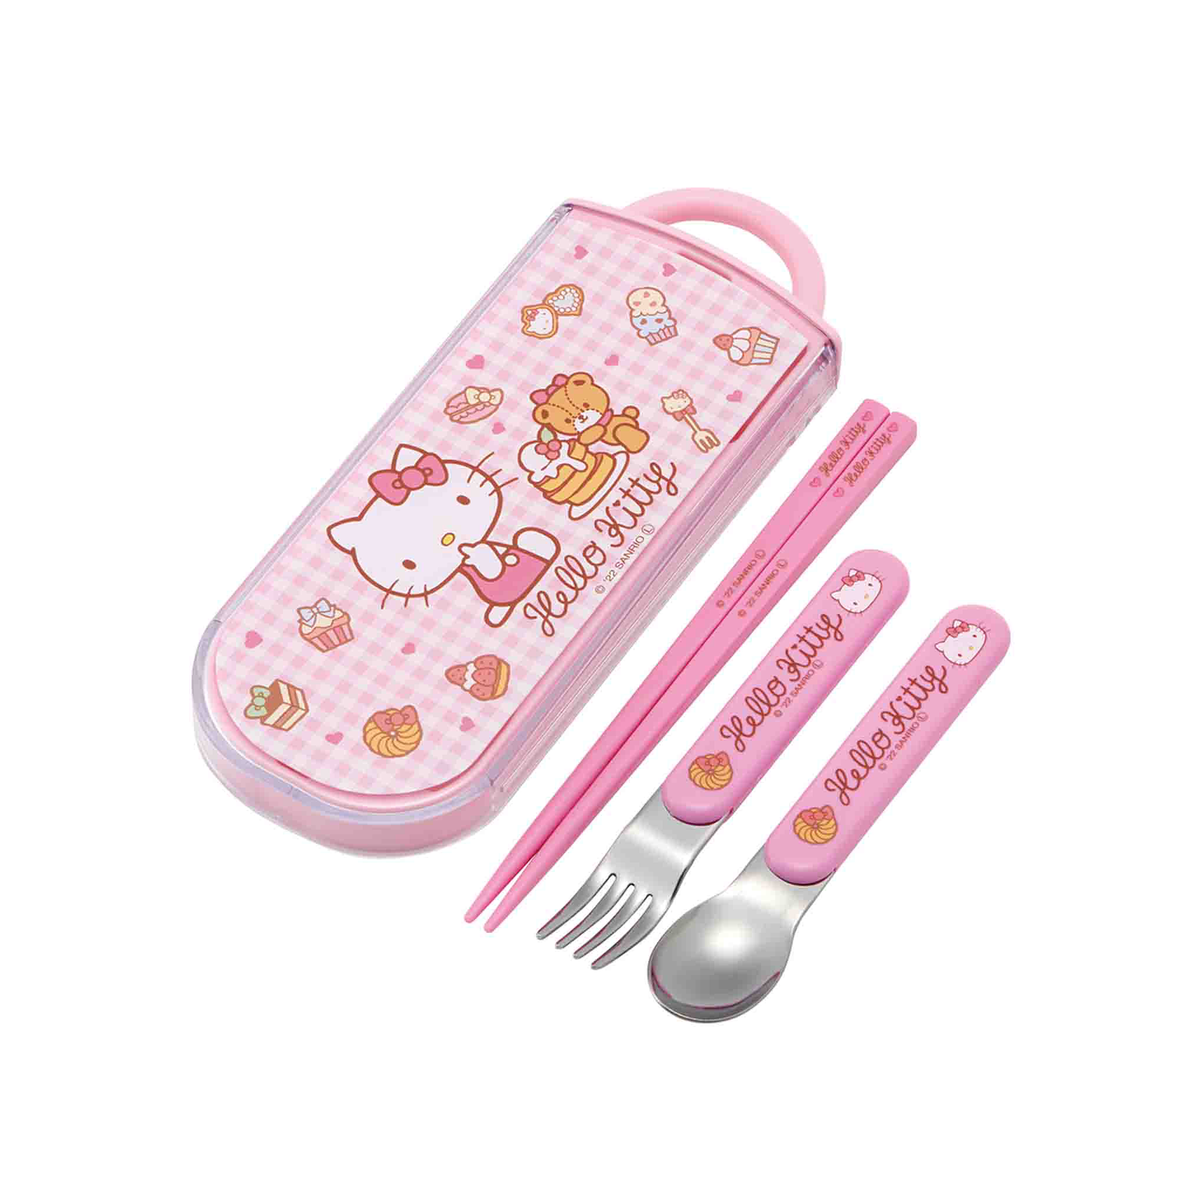 Hello Kitty Utensil Set Trio Home Goods CLEVER IDIOTS   